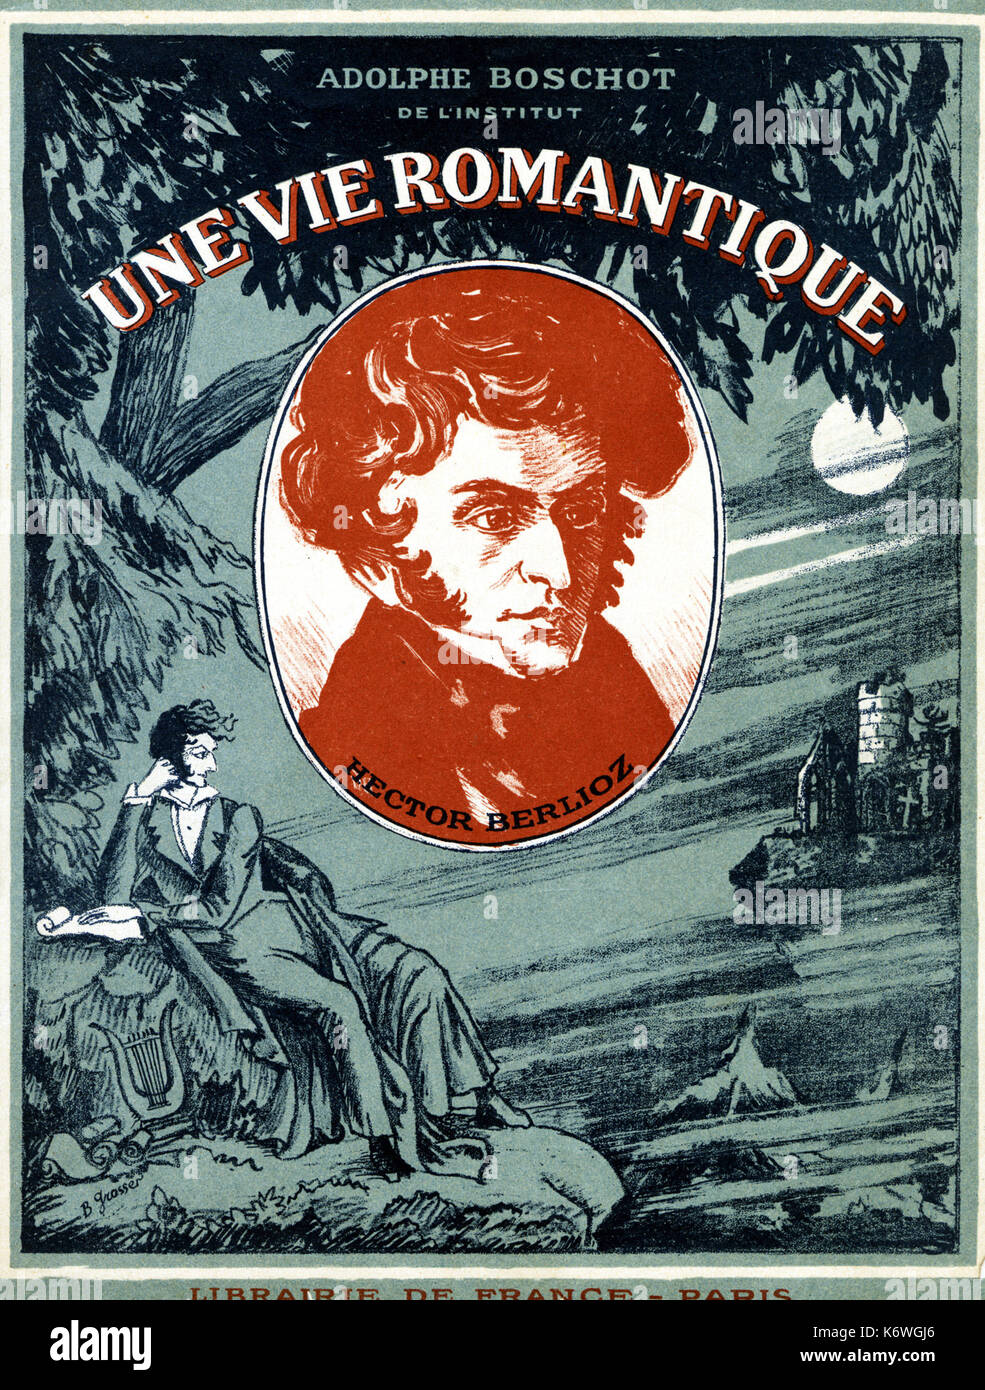 Hector Berlioz's portrait on cover of book: 'Une Vie Romantique', Broschot, 1927.  French composer (1803-1869) Stock Photo